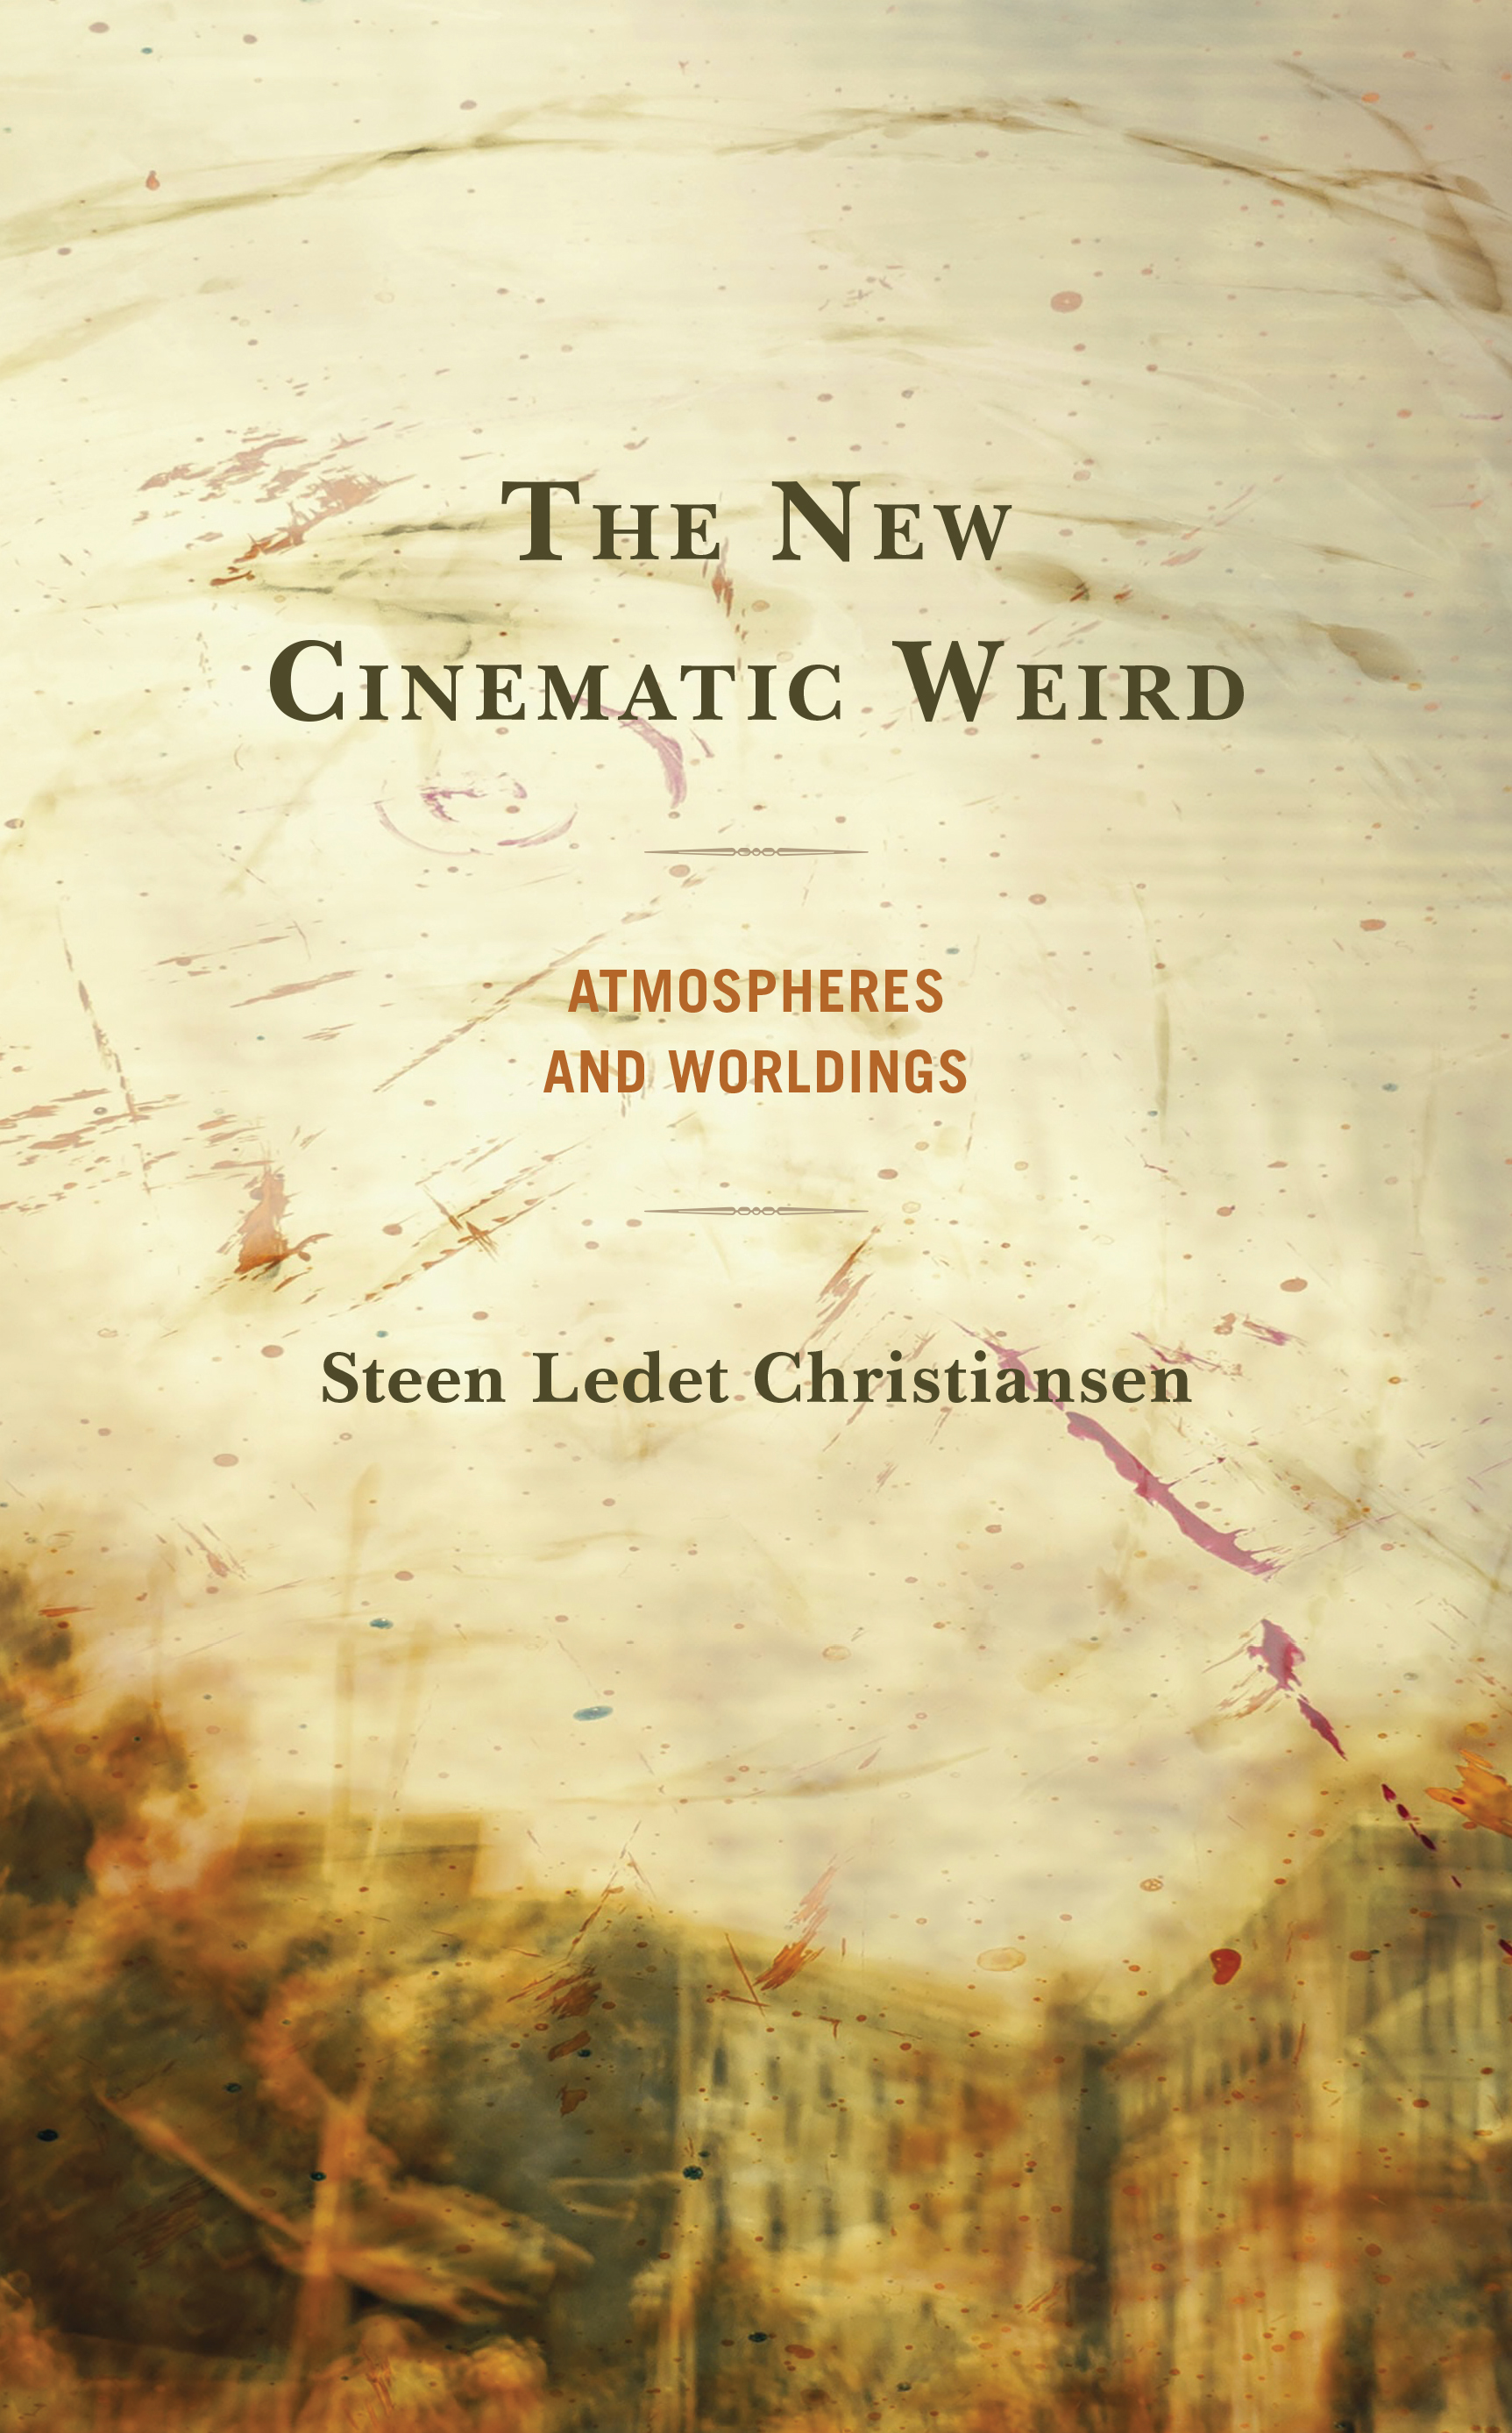 The New Cinematic Weird: Atmospheres and Worldings